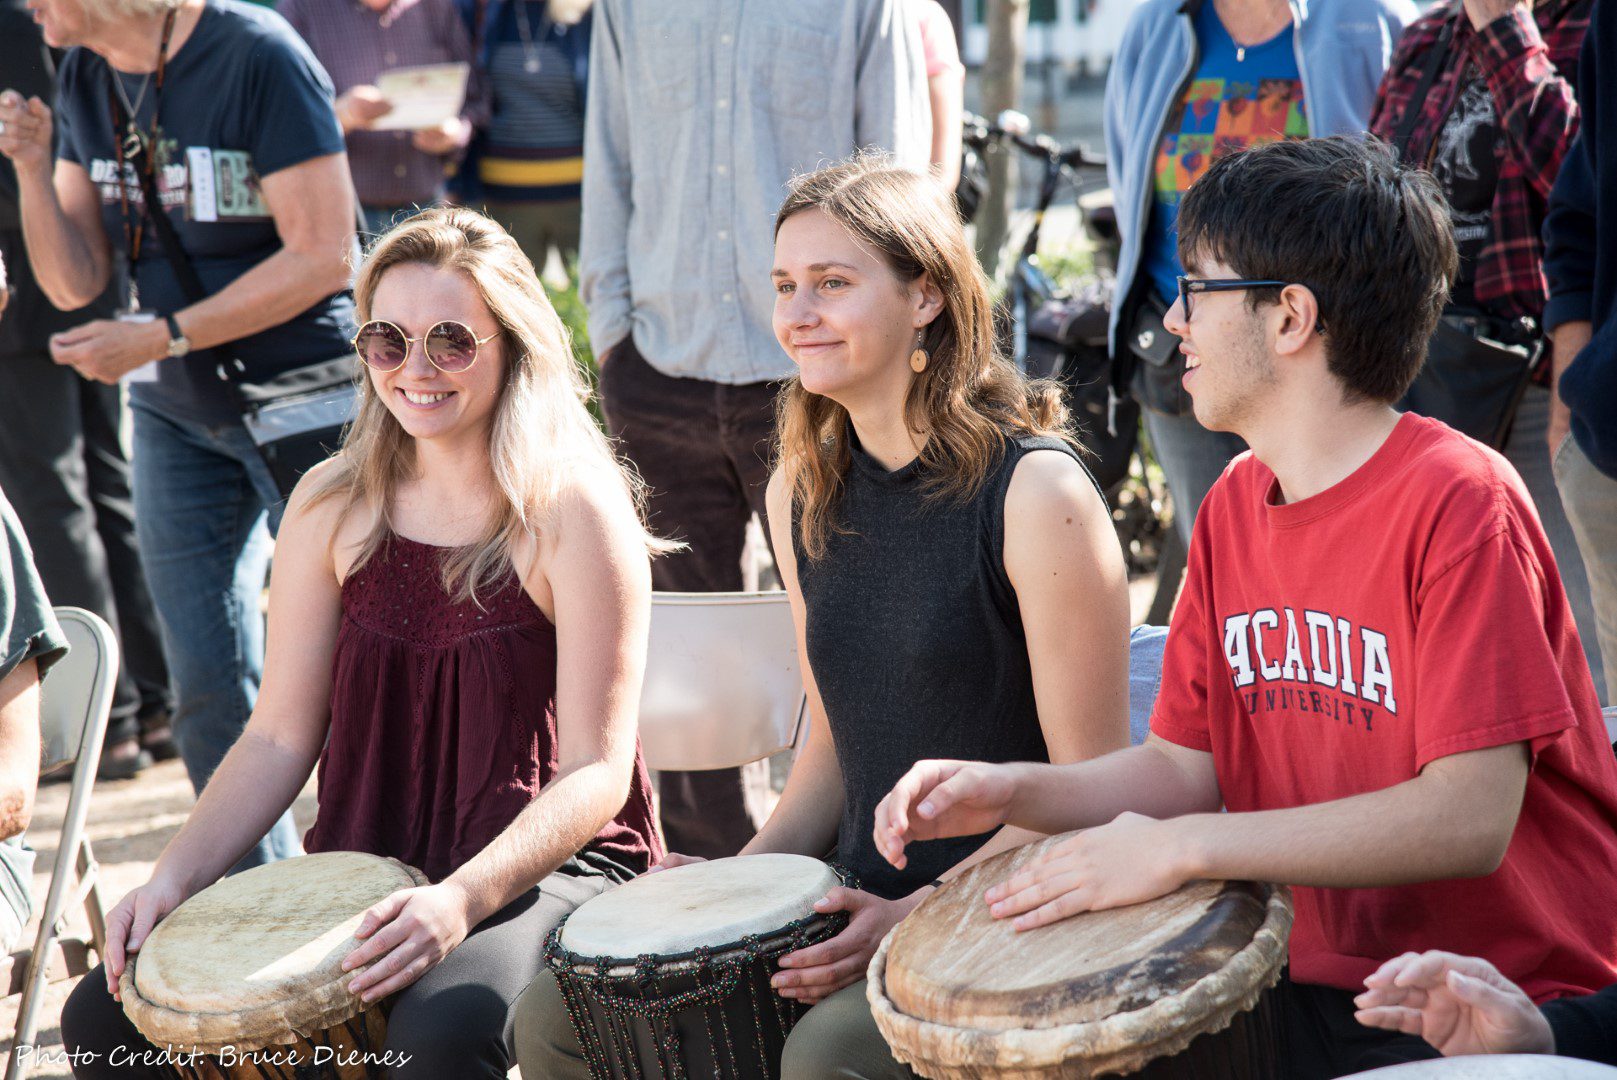 Acadia students at the Deep Roots Music Festival drum circle